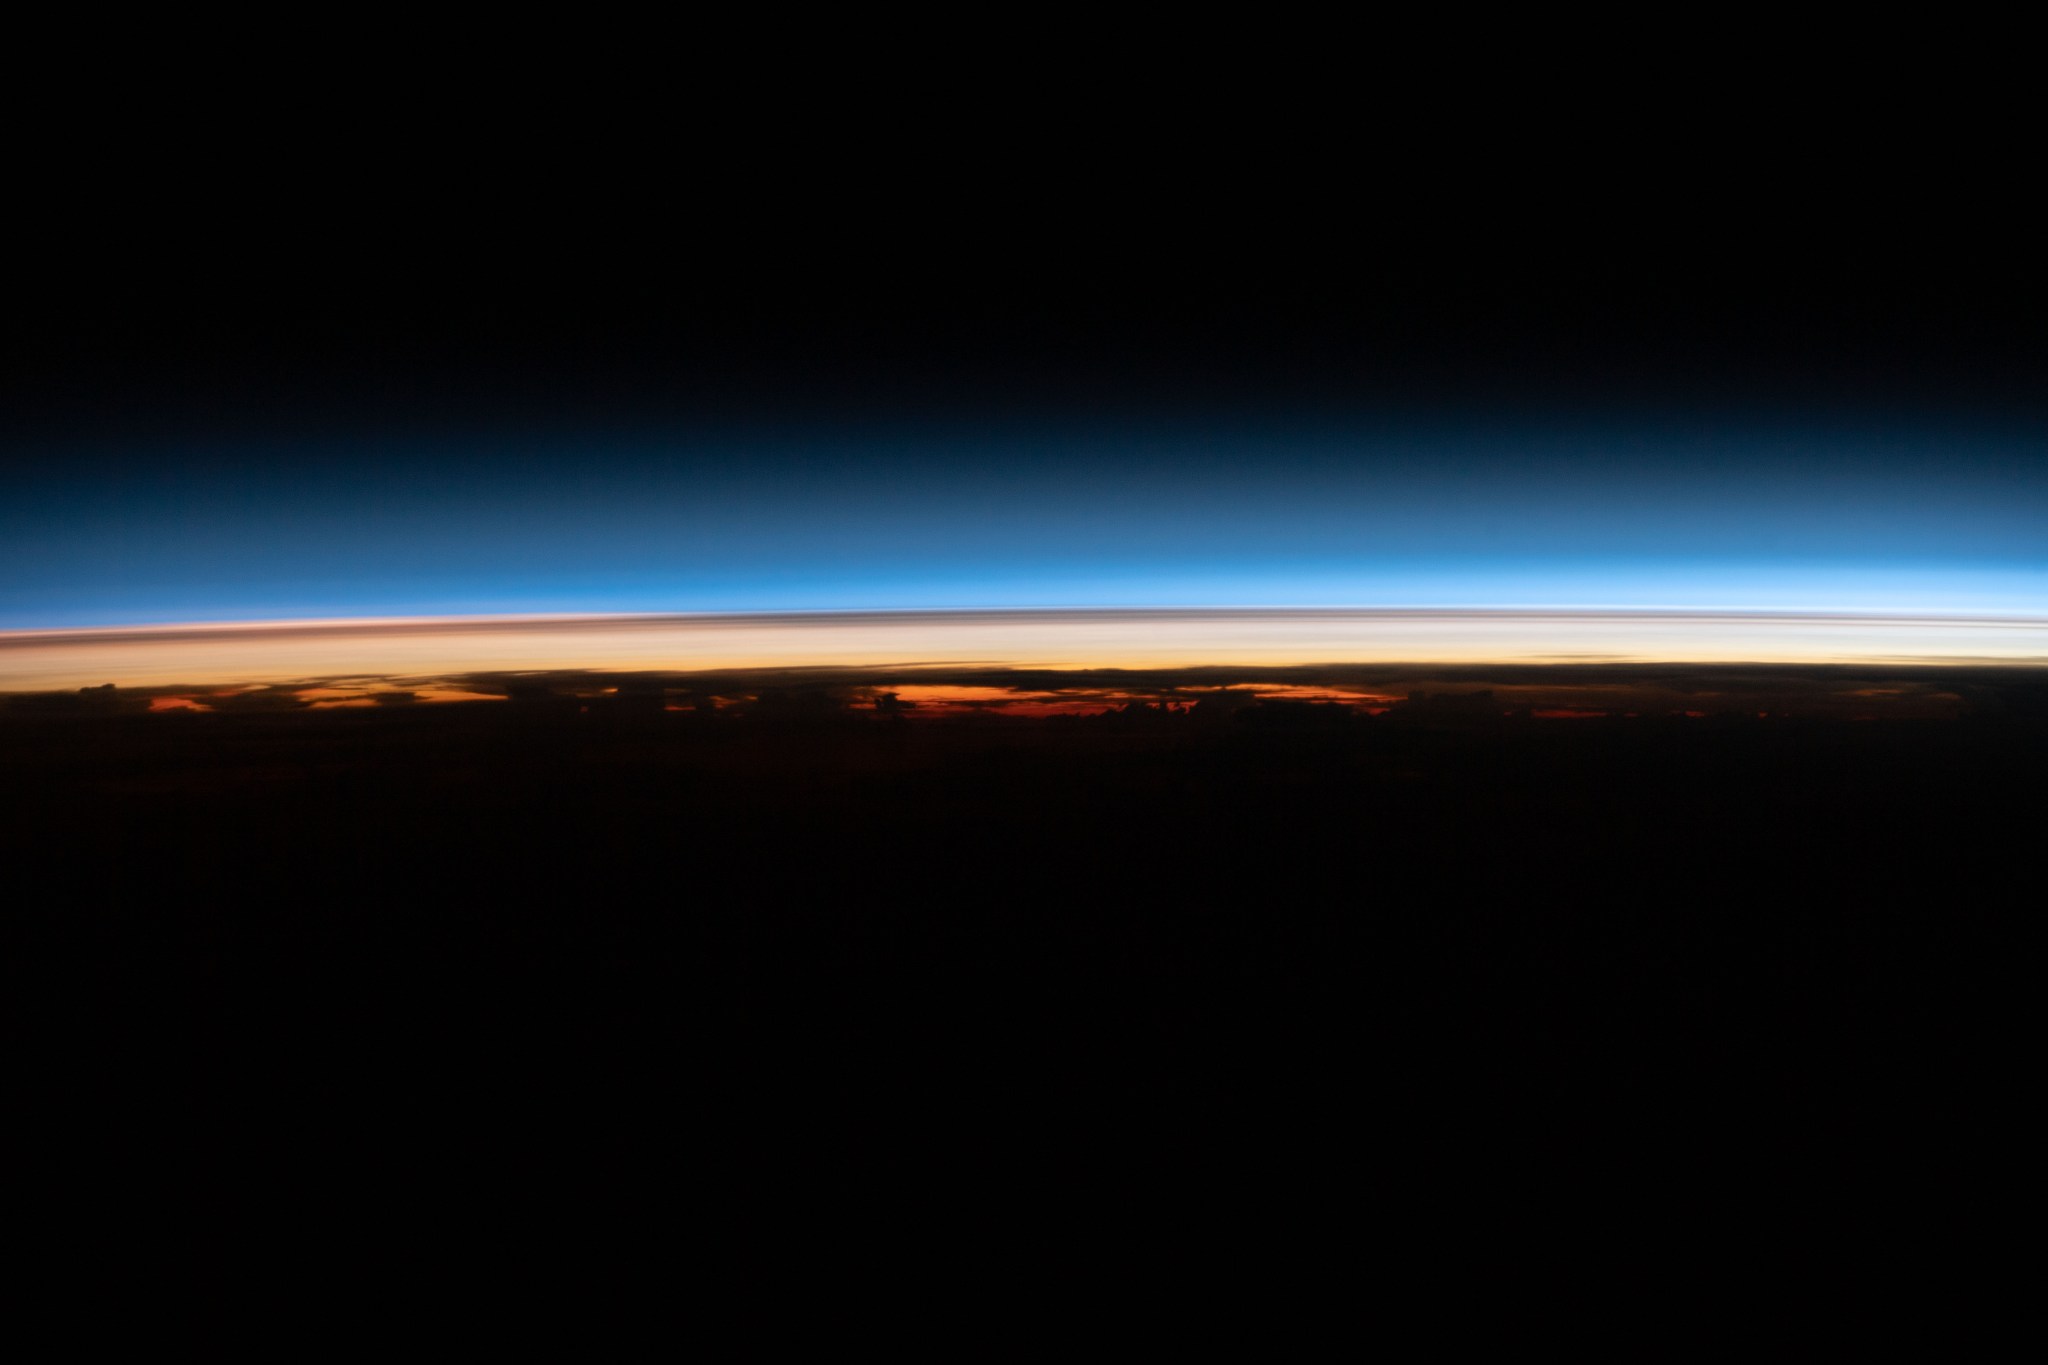 In this photo captured from the ISS in March 2022, the Earth’s limb is shown with a dark thin layer sitting in the bluish color of the stratosphere. This dark thin layer is remnants of the Tonga volcanic plume, lingering in Earth’s stratosphere.